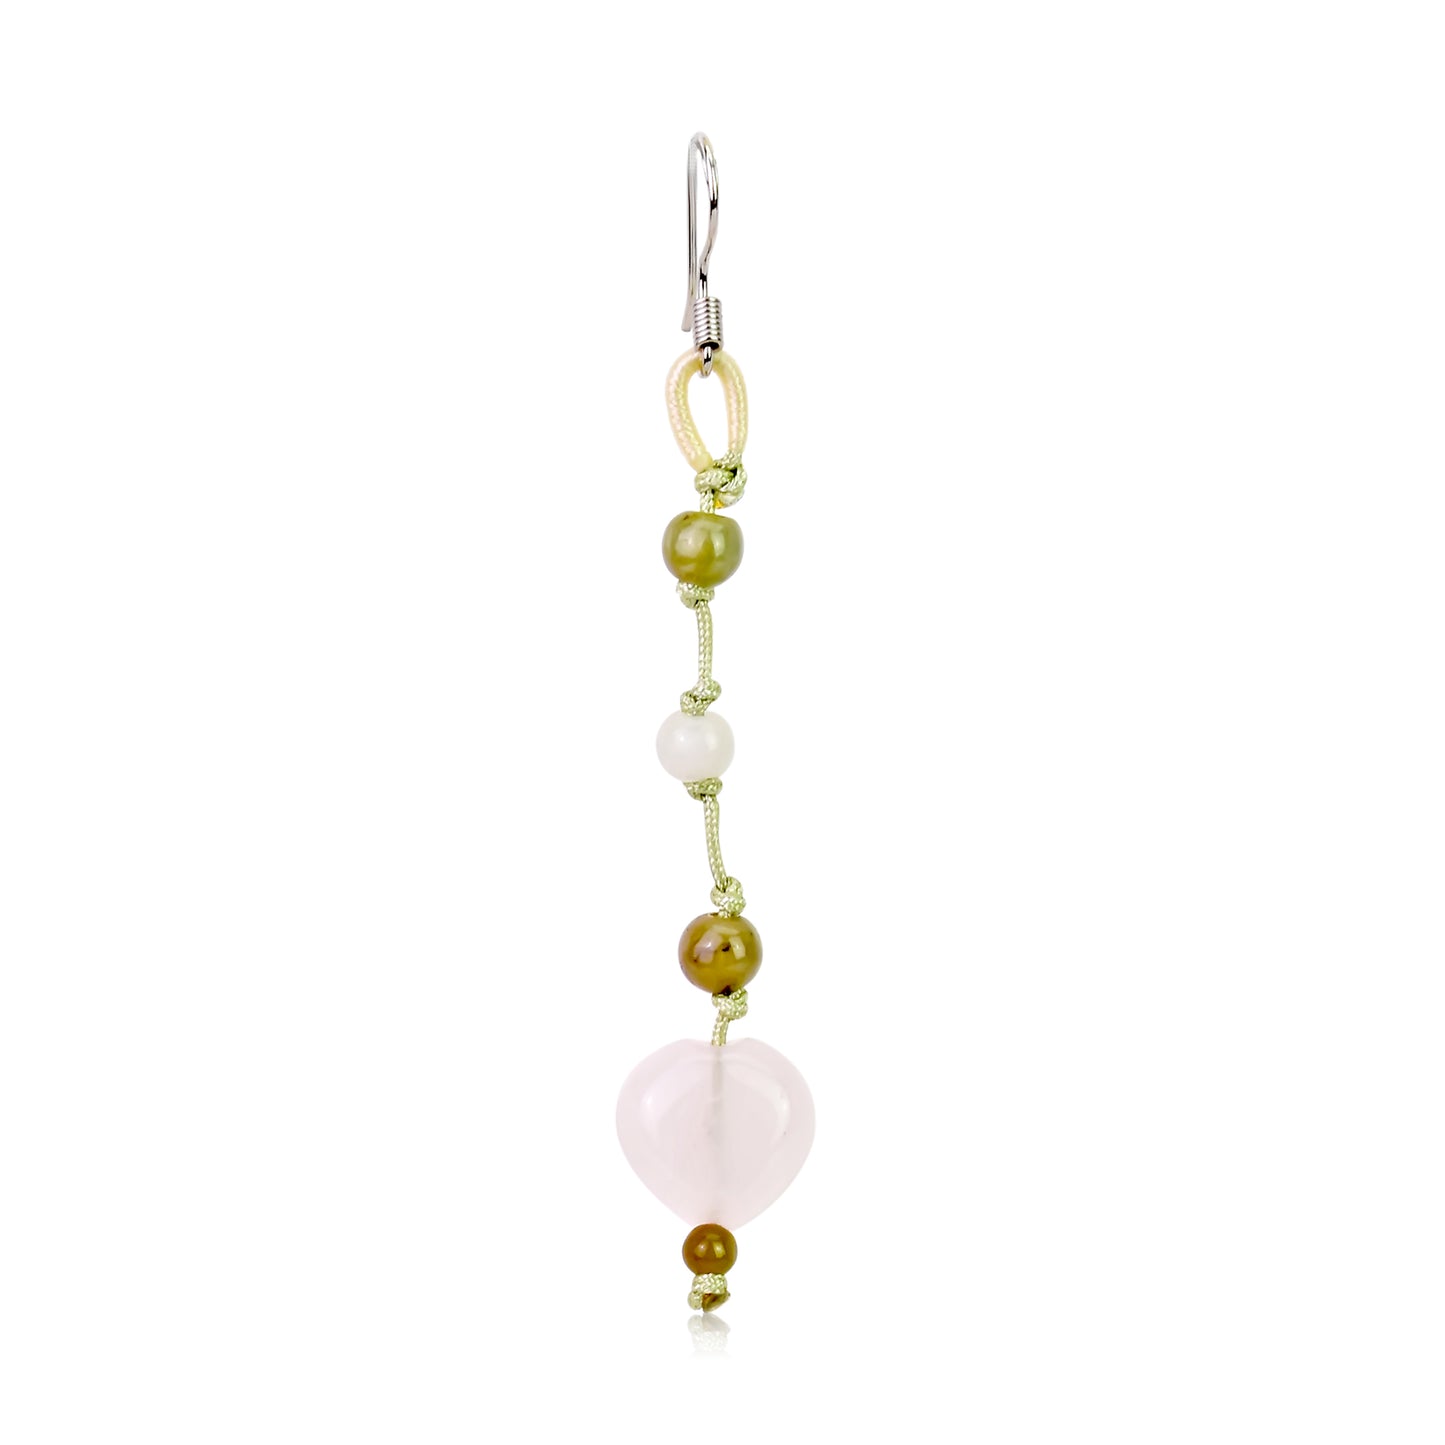 Add a Pop of Color with Rose Quartz Heart Earrings made with Sea Green Cord